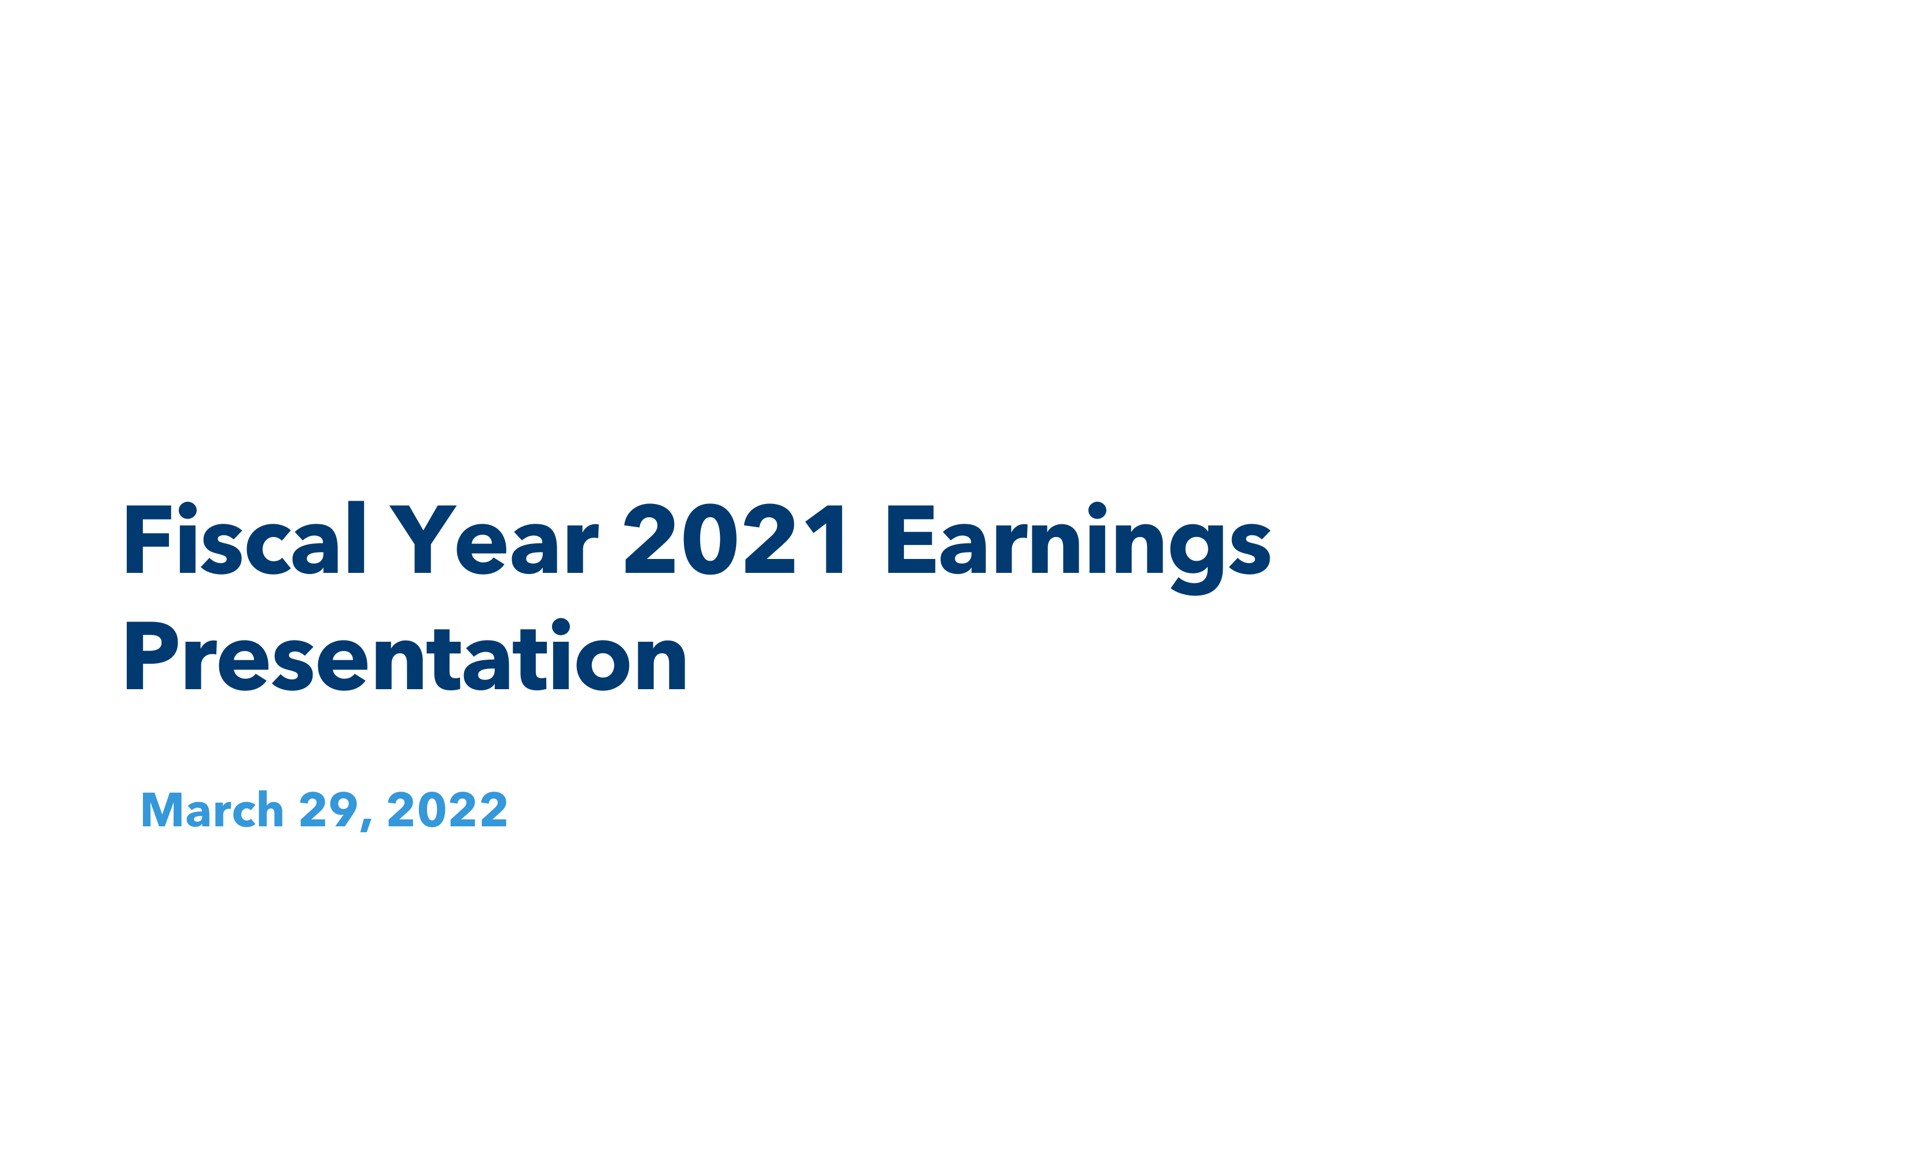 fiscal year earnings presentation | Core Scientific